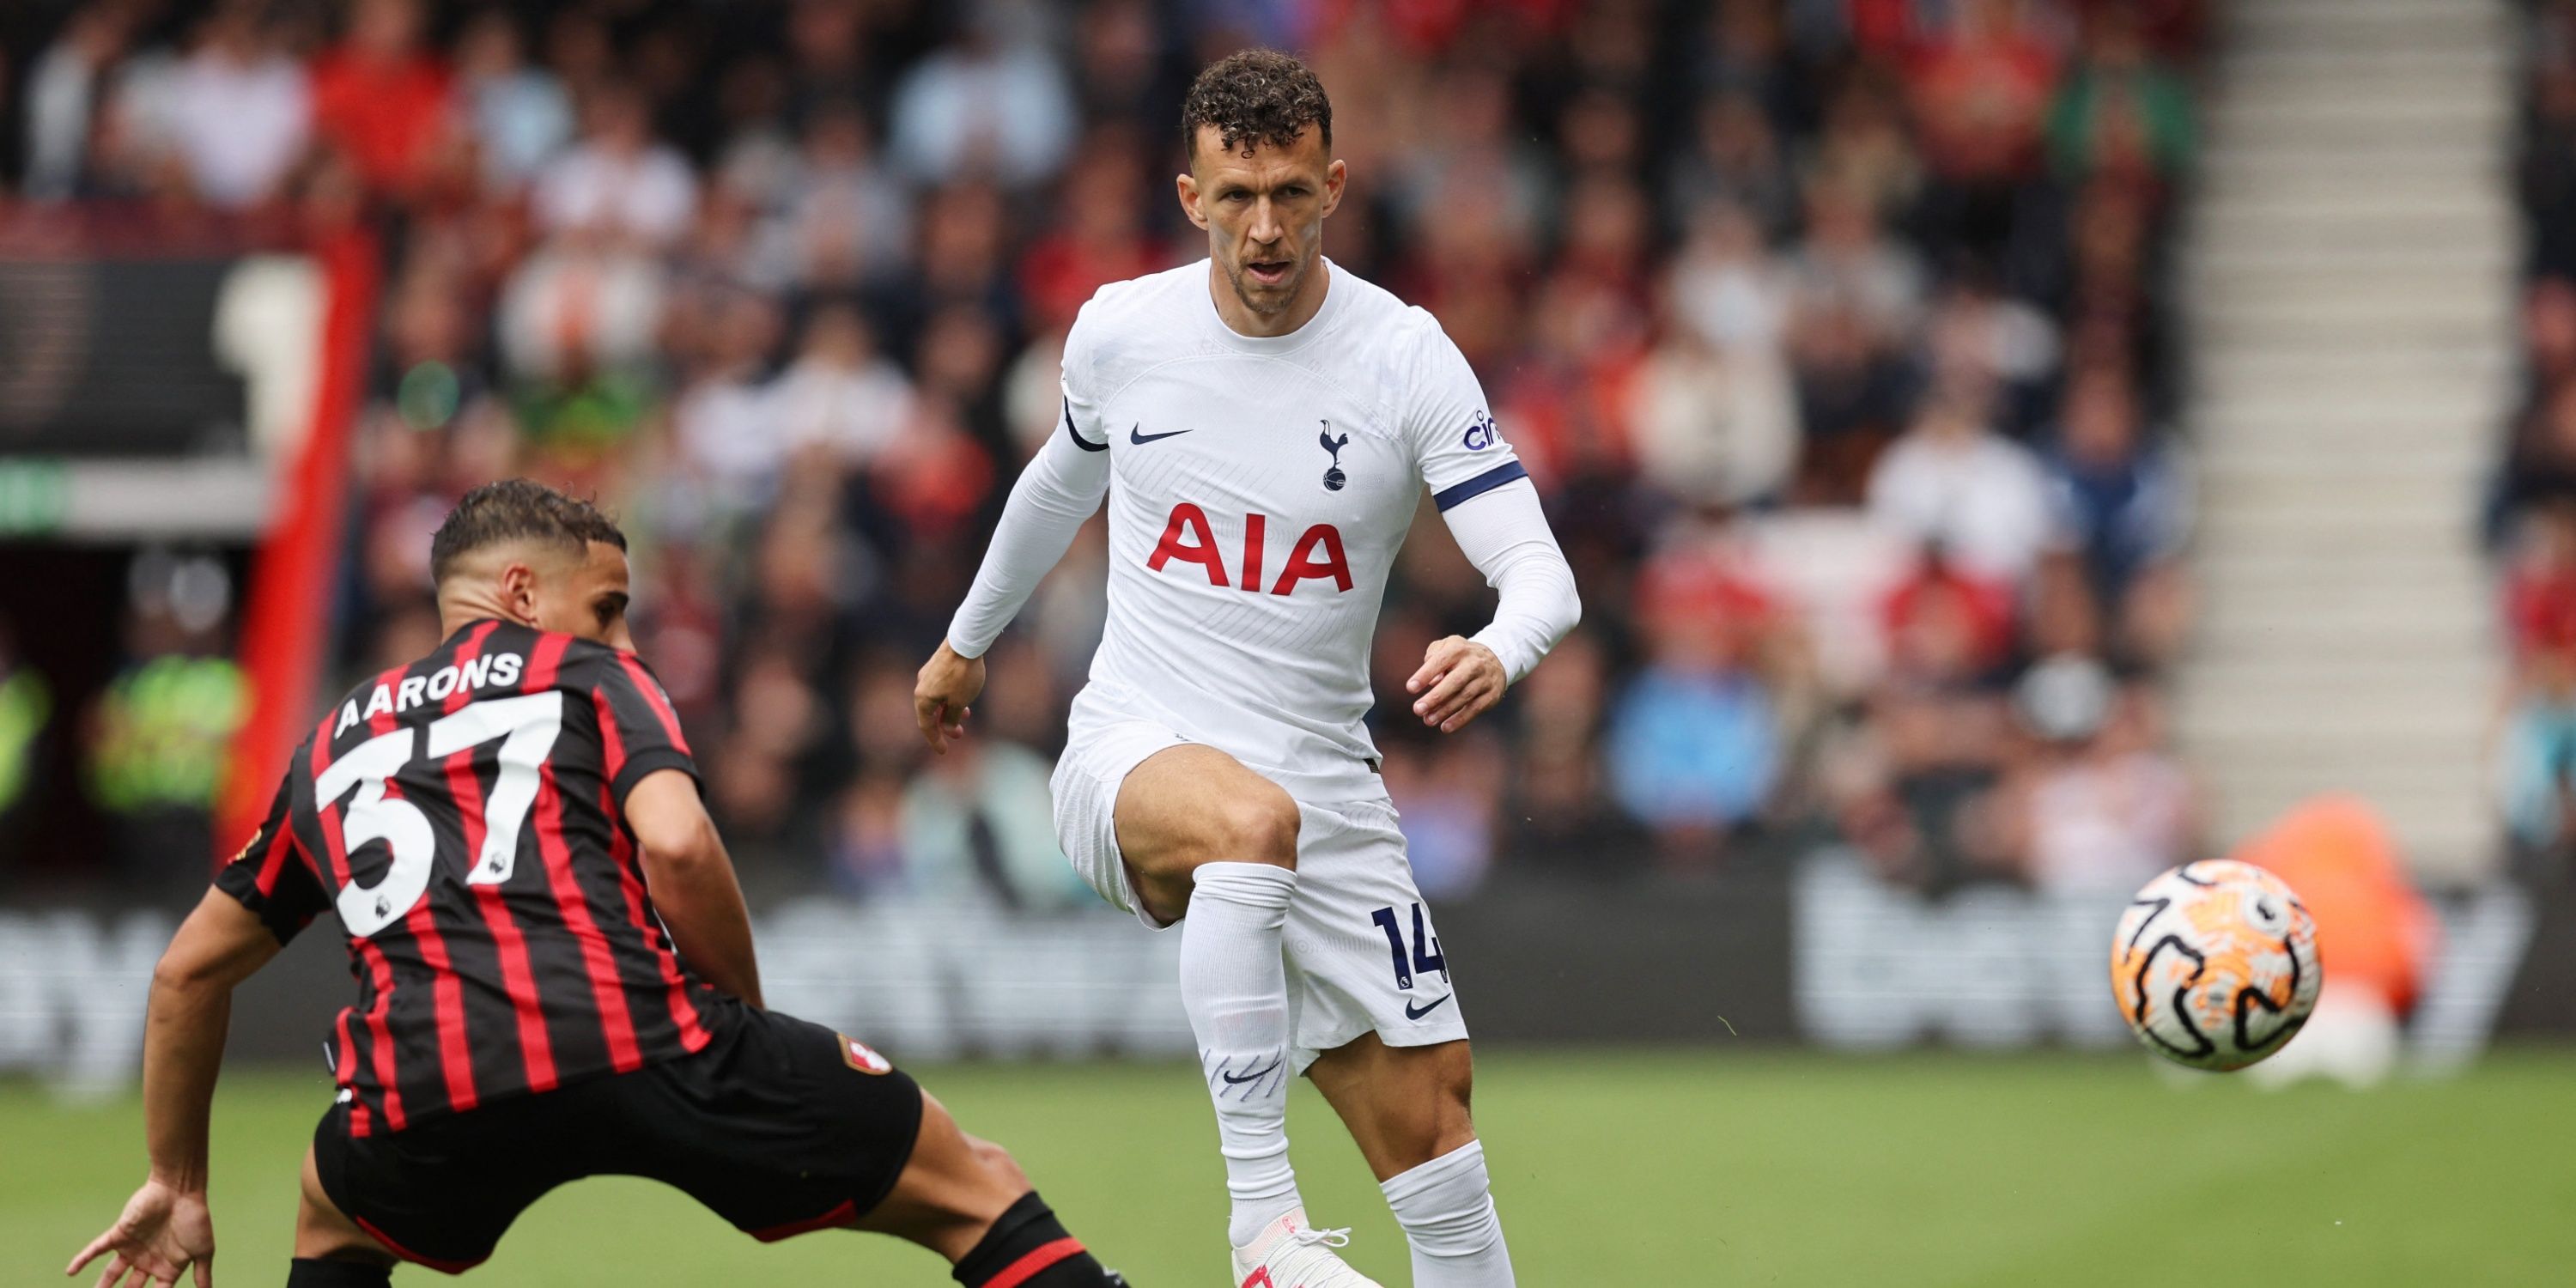 after perisic, tottenham player wants january exit as levy lowers price tag